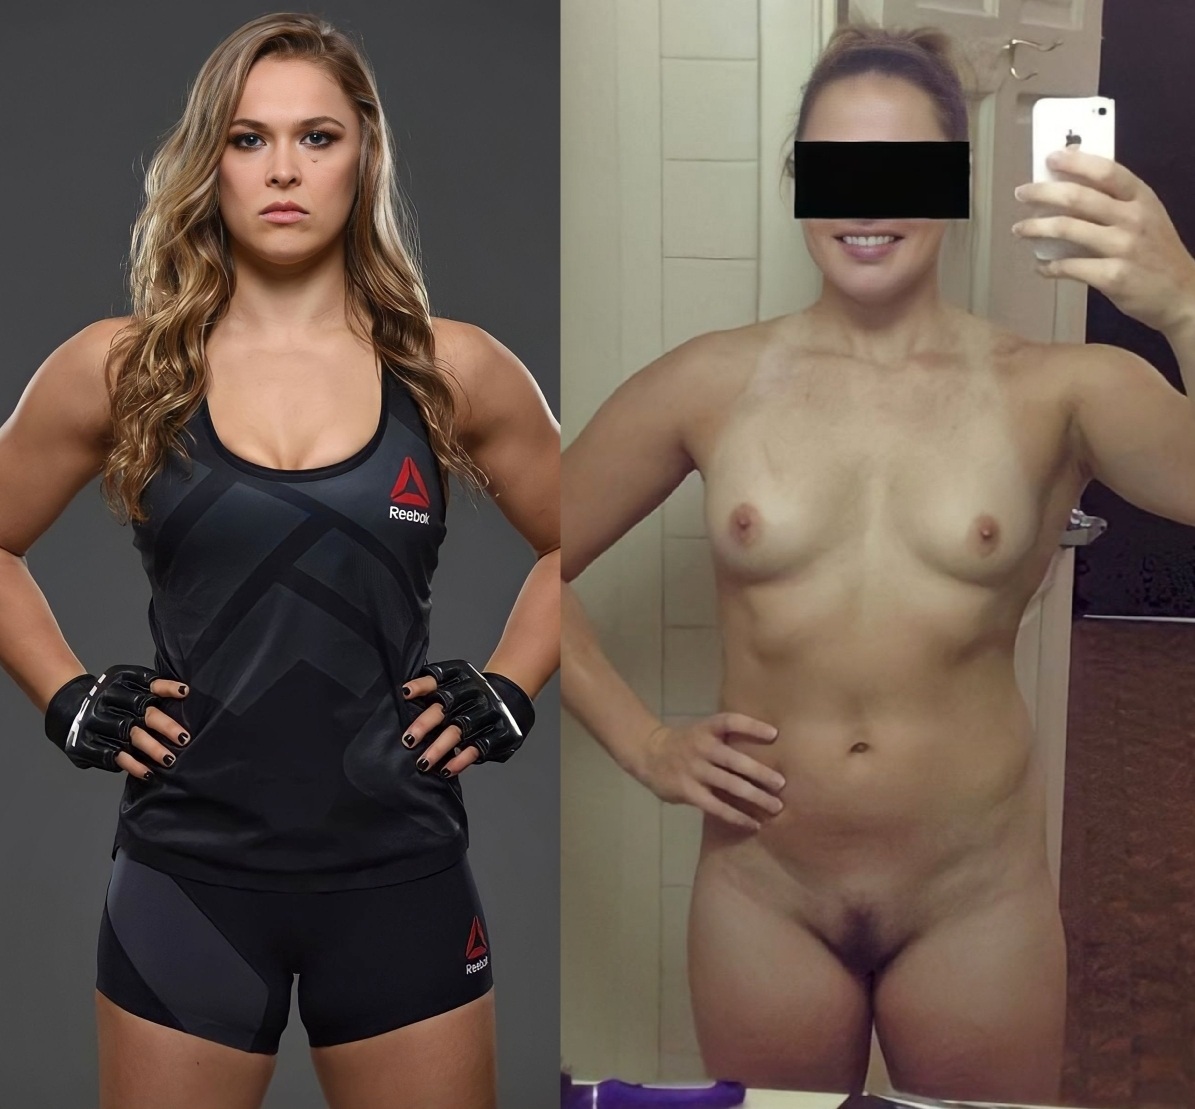 Ronda rousey breasts